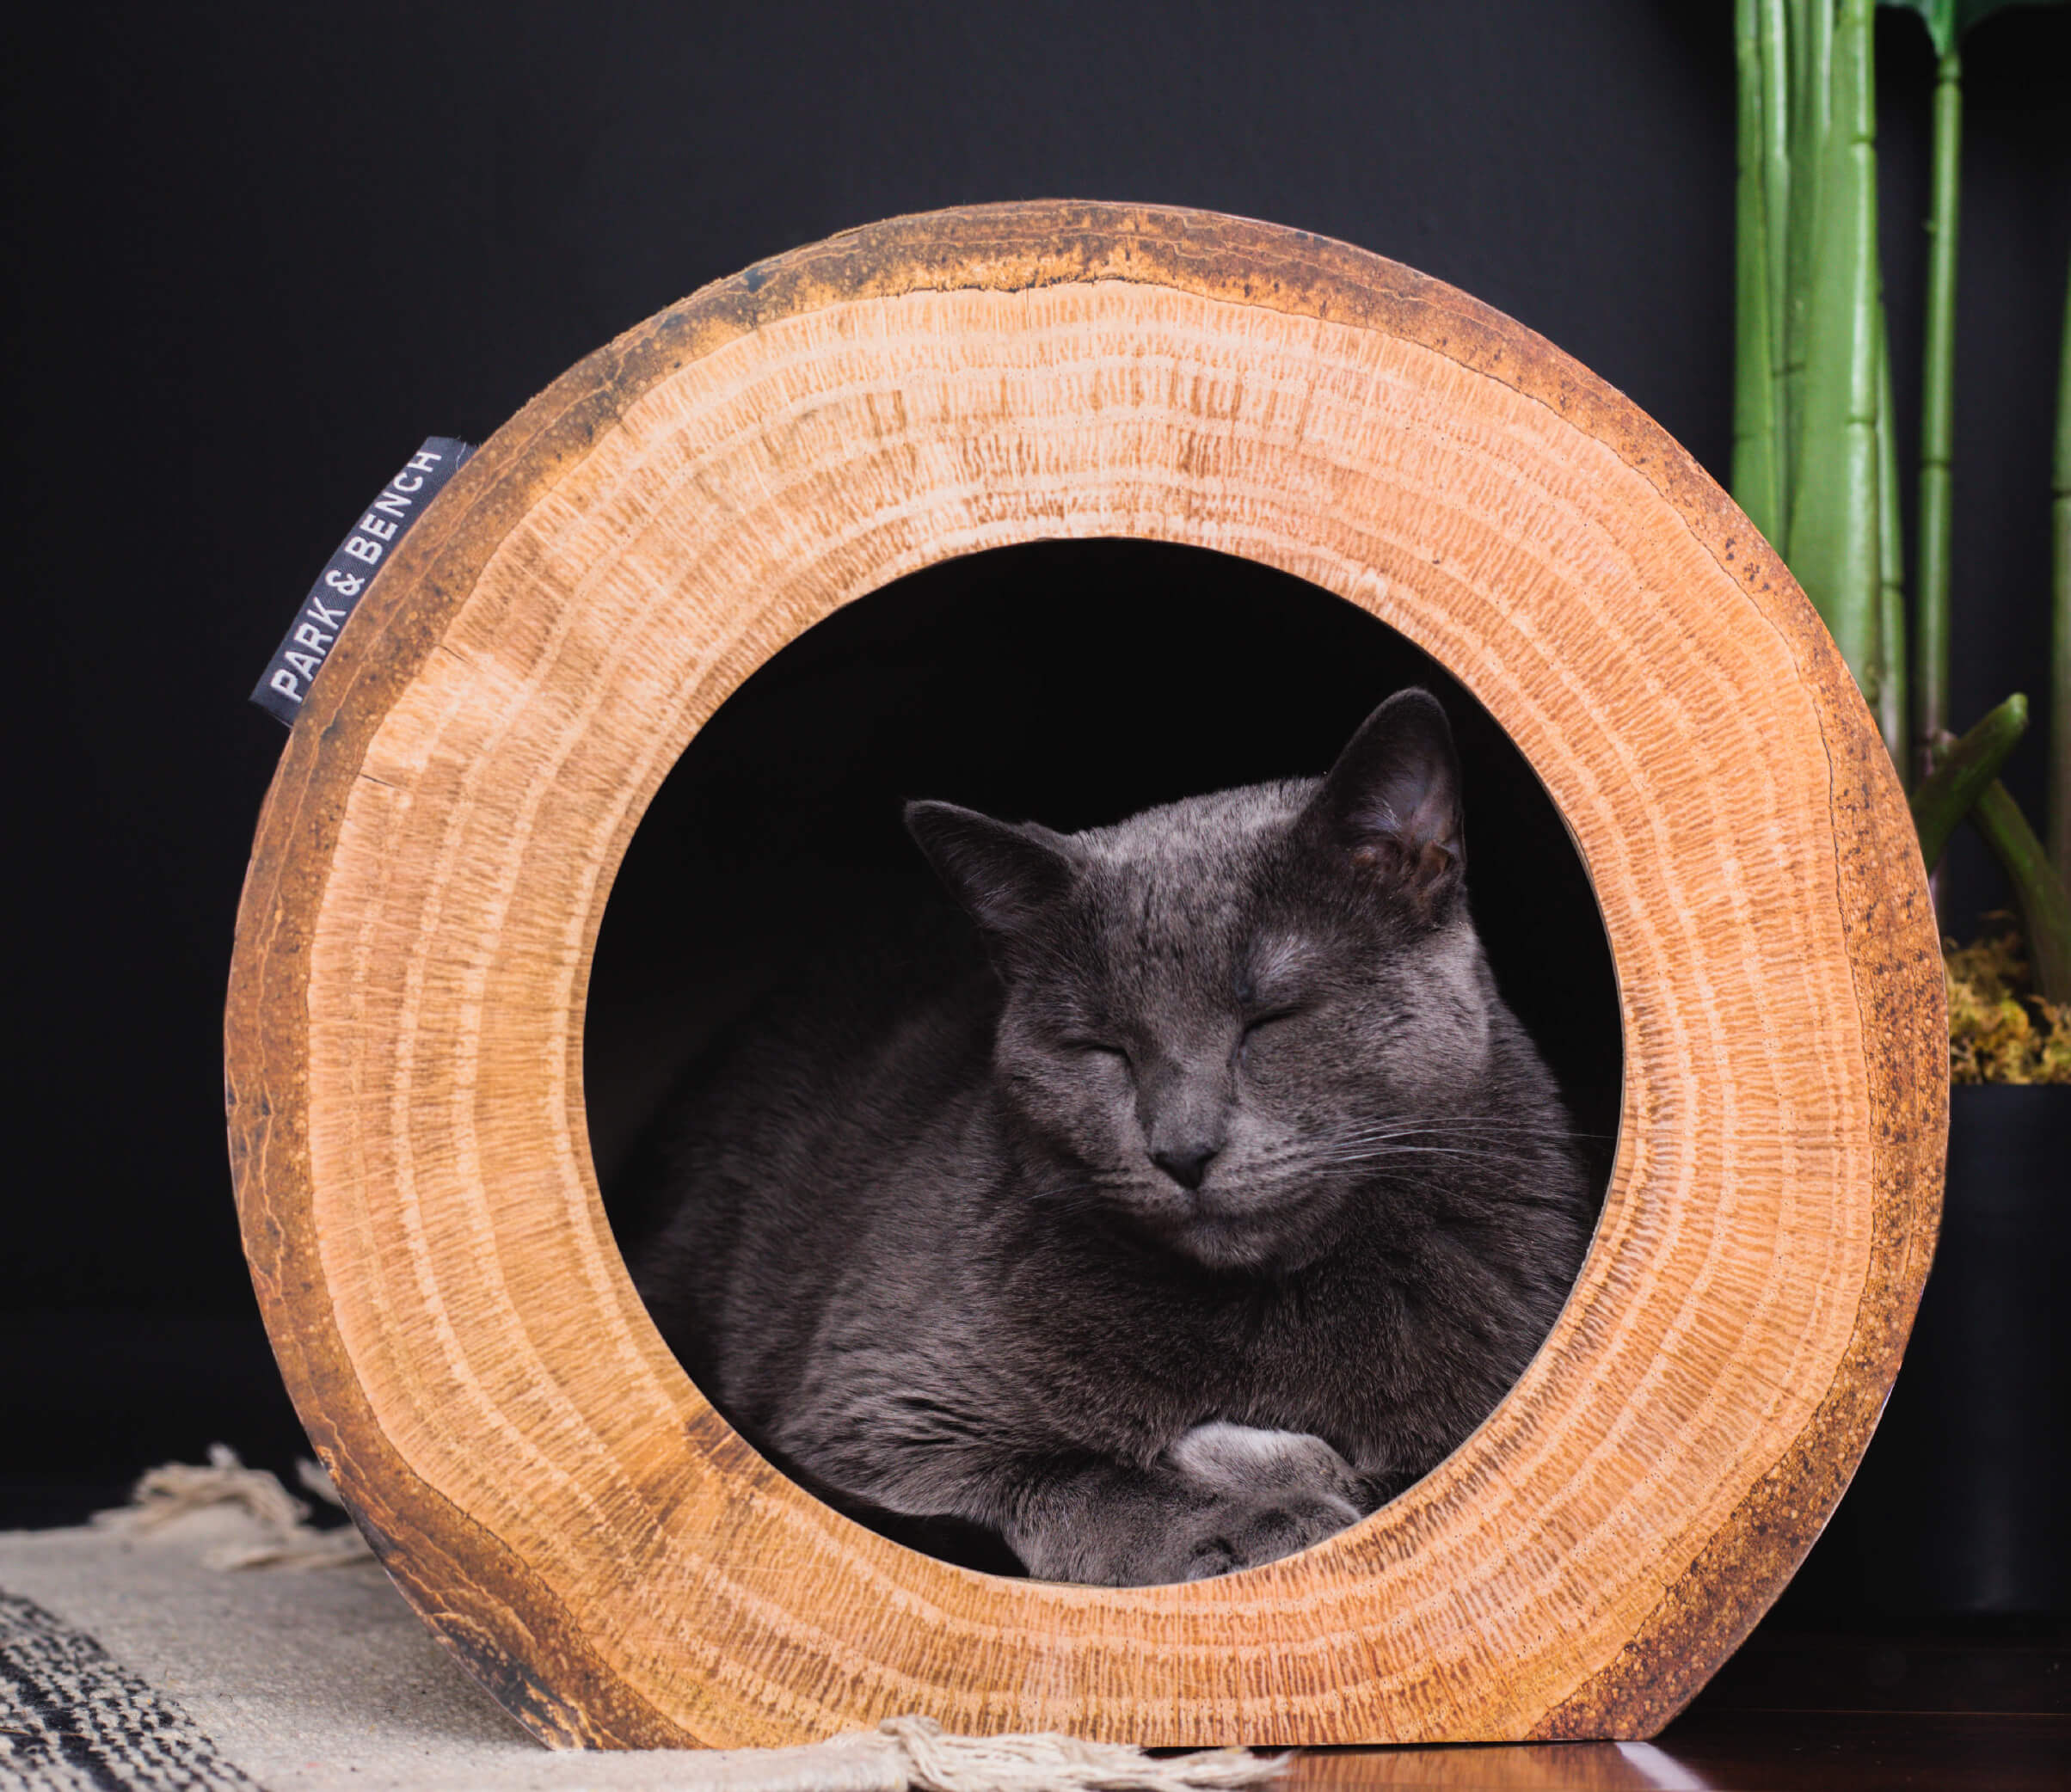 Don’t sacrifice your furniture because your cat scratches. Corrugated cardboard, an enticing smell, and an exercise-promoting design encourages cats to scratch and mark on their logs rather than your furniture.